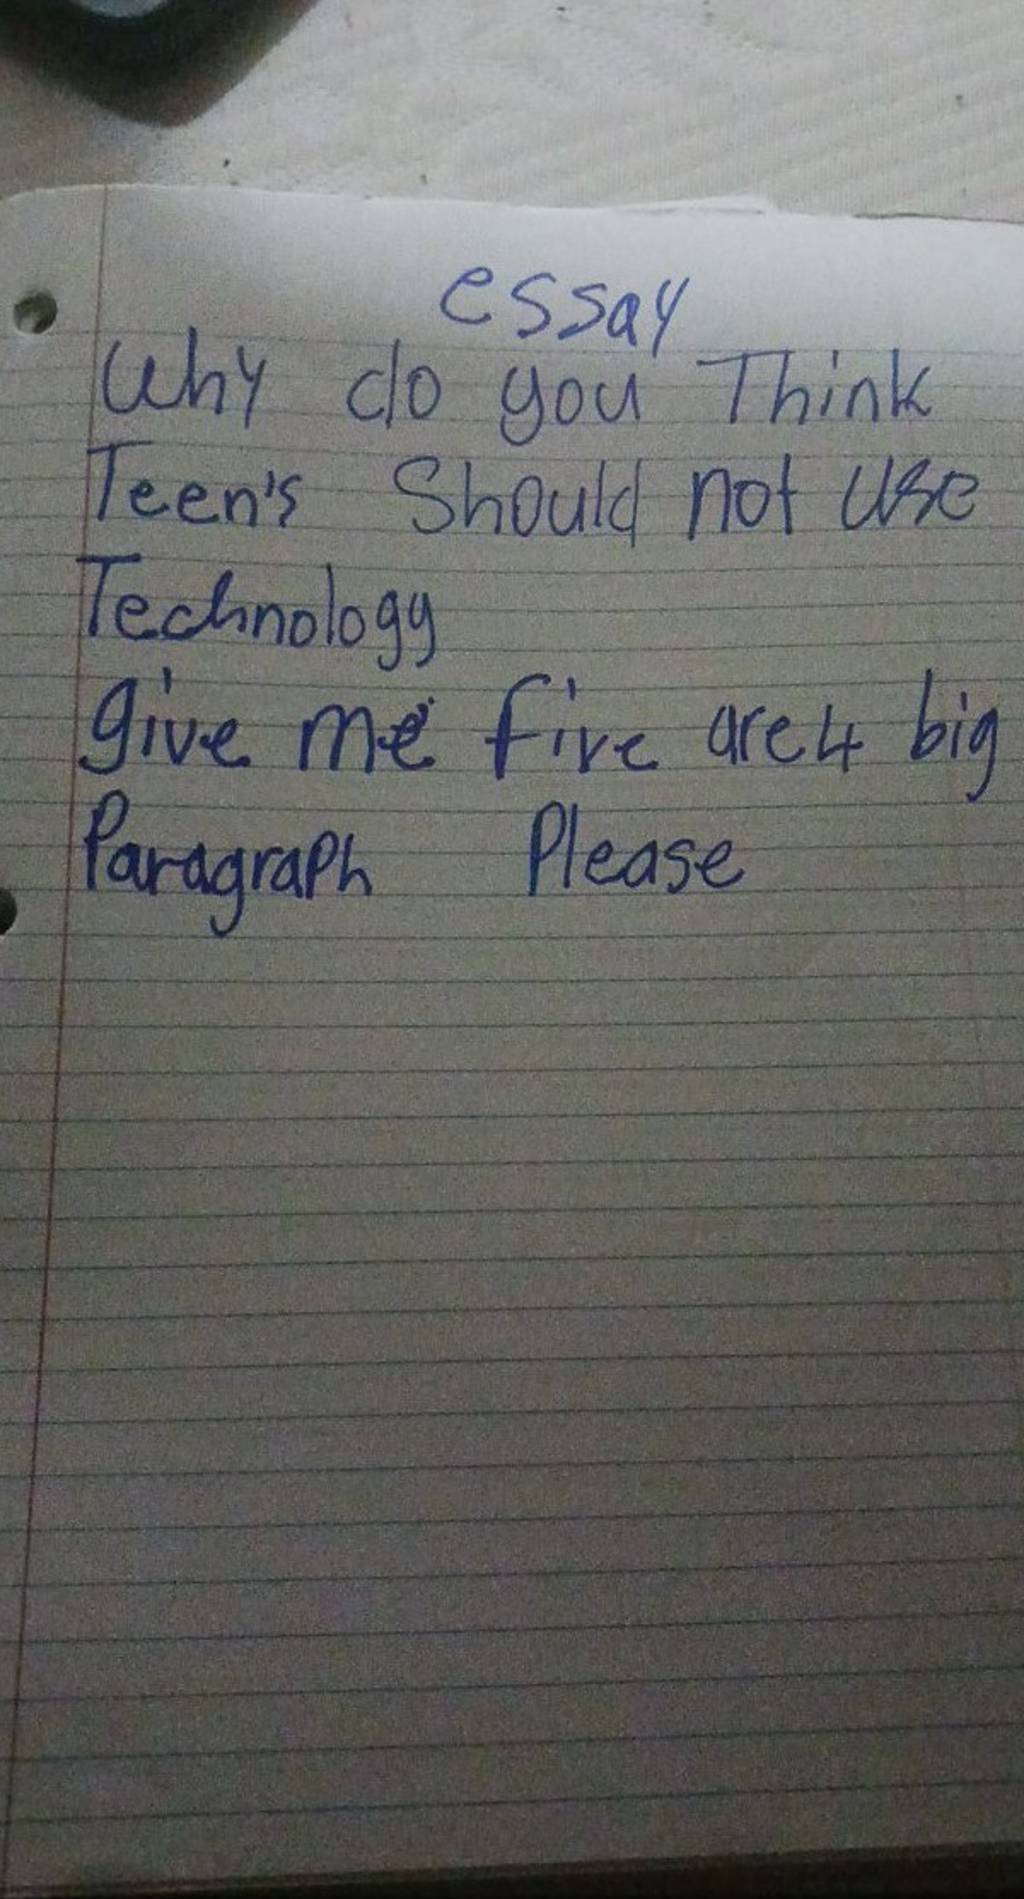 Why essay Teen's Shou Think Technology give me five are 4 big Paragrap